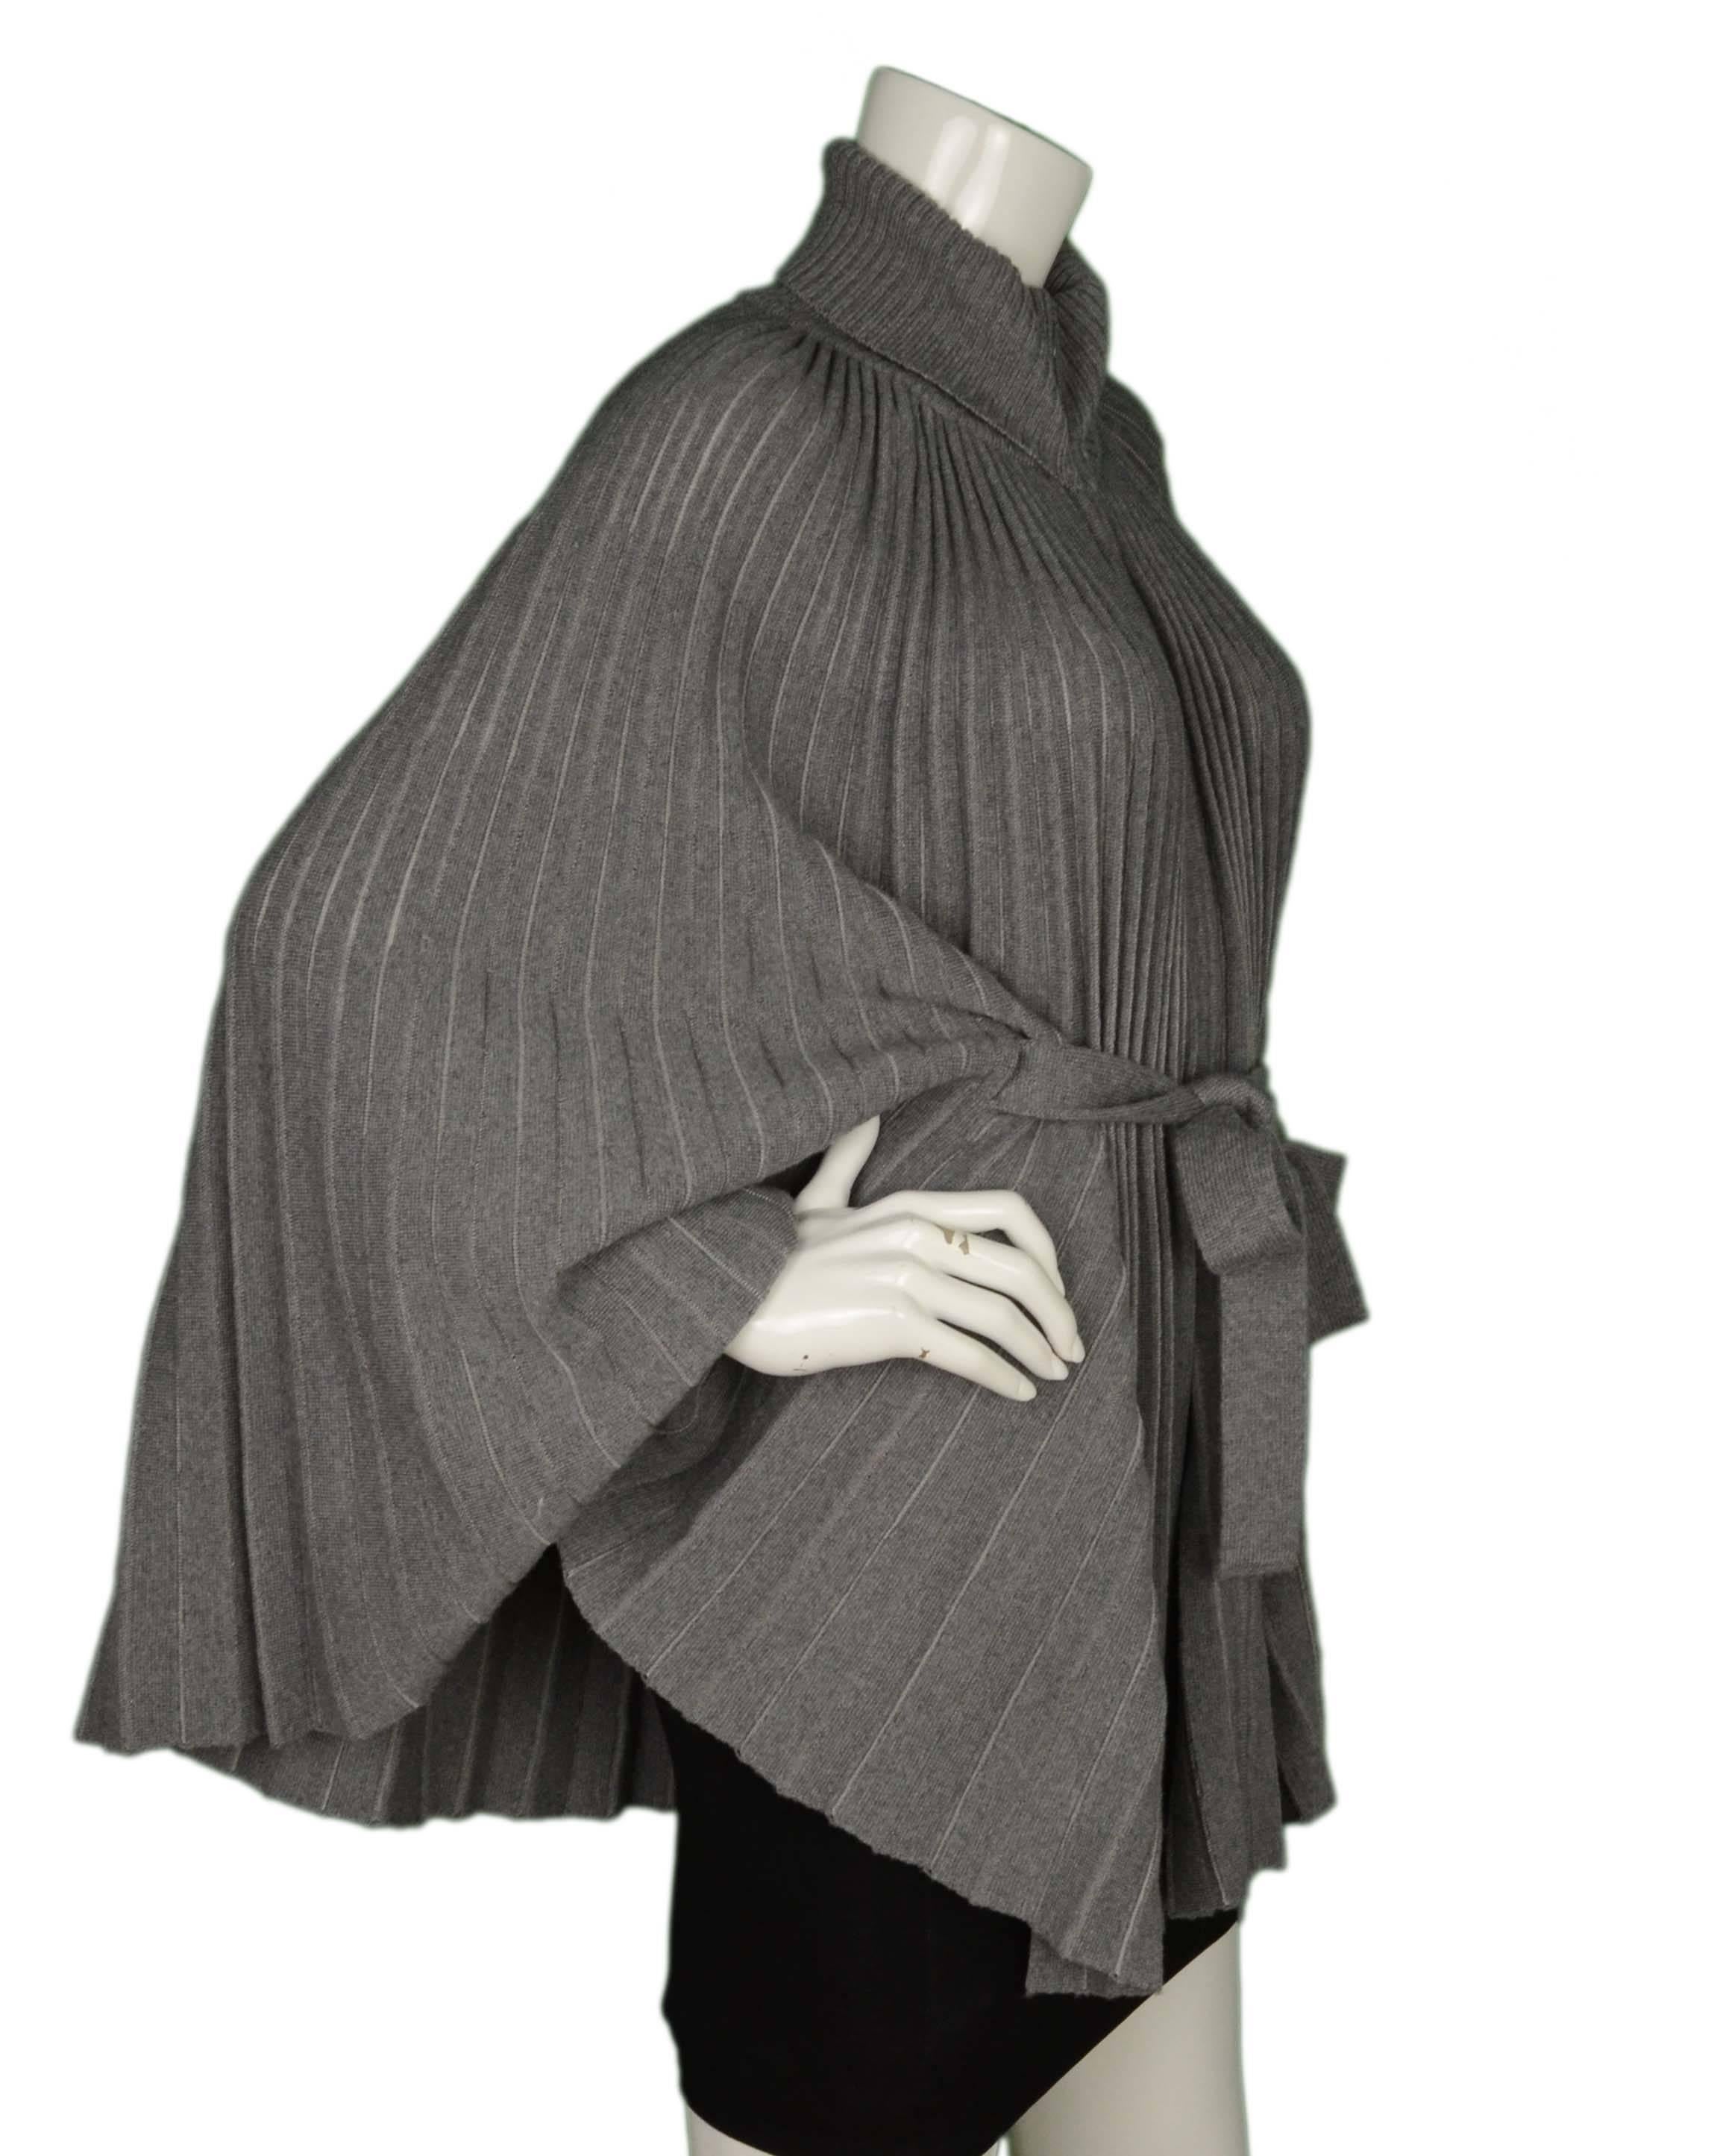 Valentino Grey Wool Pleated Cape
Features waist tie
Made In: Italy
Color: Grey
Composition: Not given- believed to be a wool blend
Lining: None
Closure/Opening: Double zipper closure
Exterior Pockets: None
Interior Pockets: None
Overall